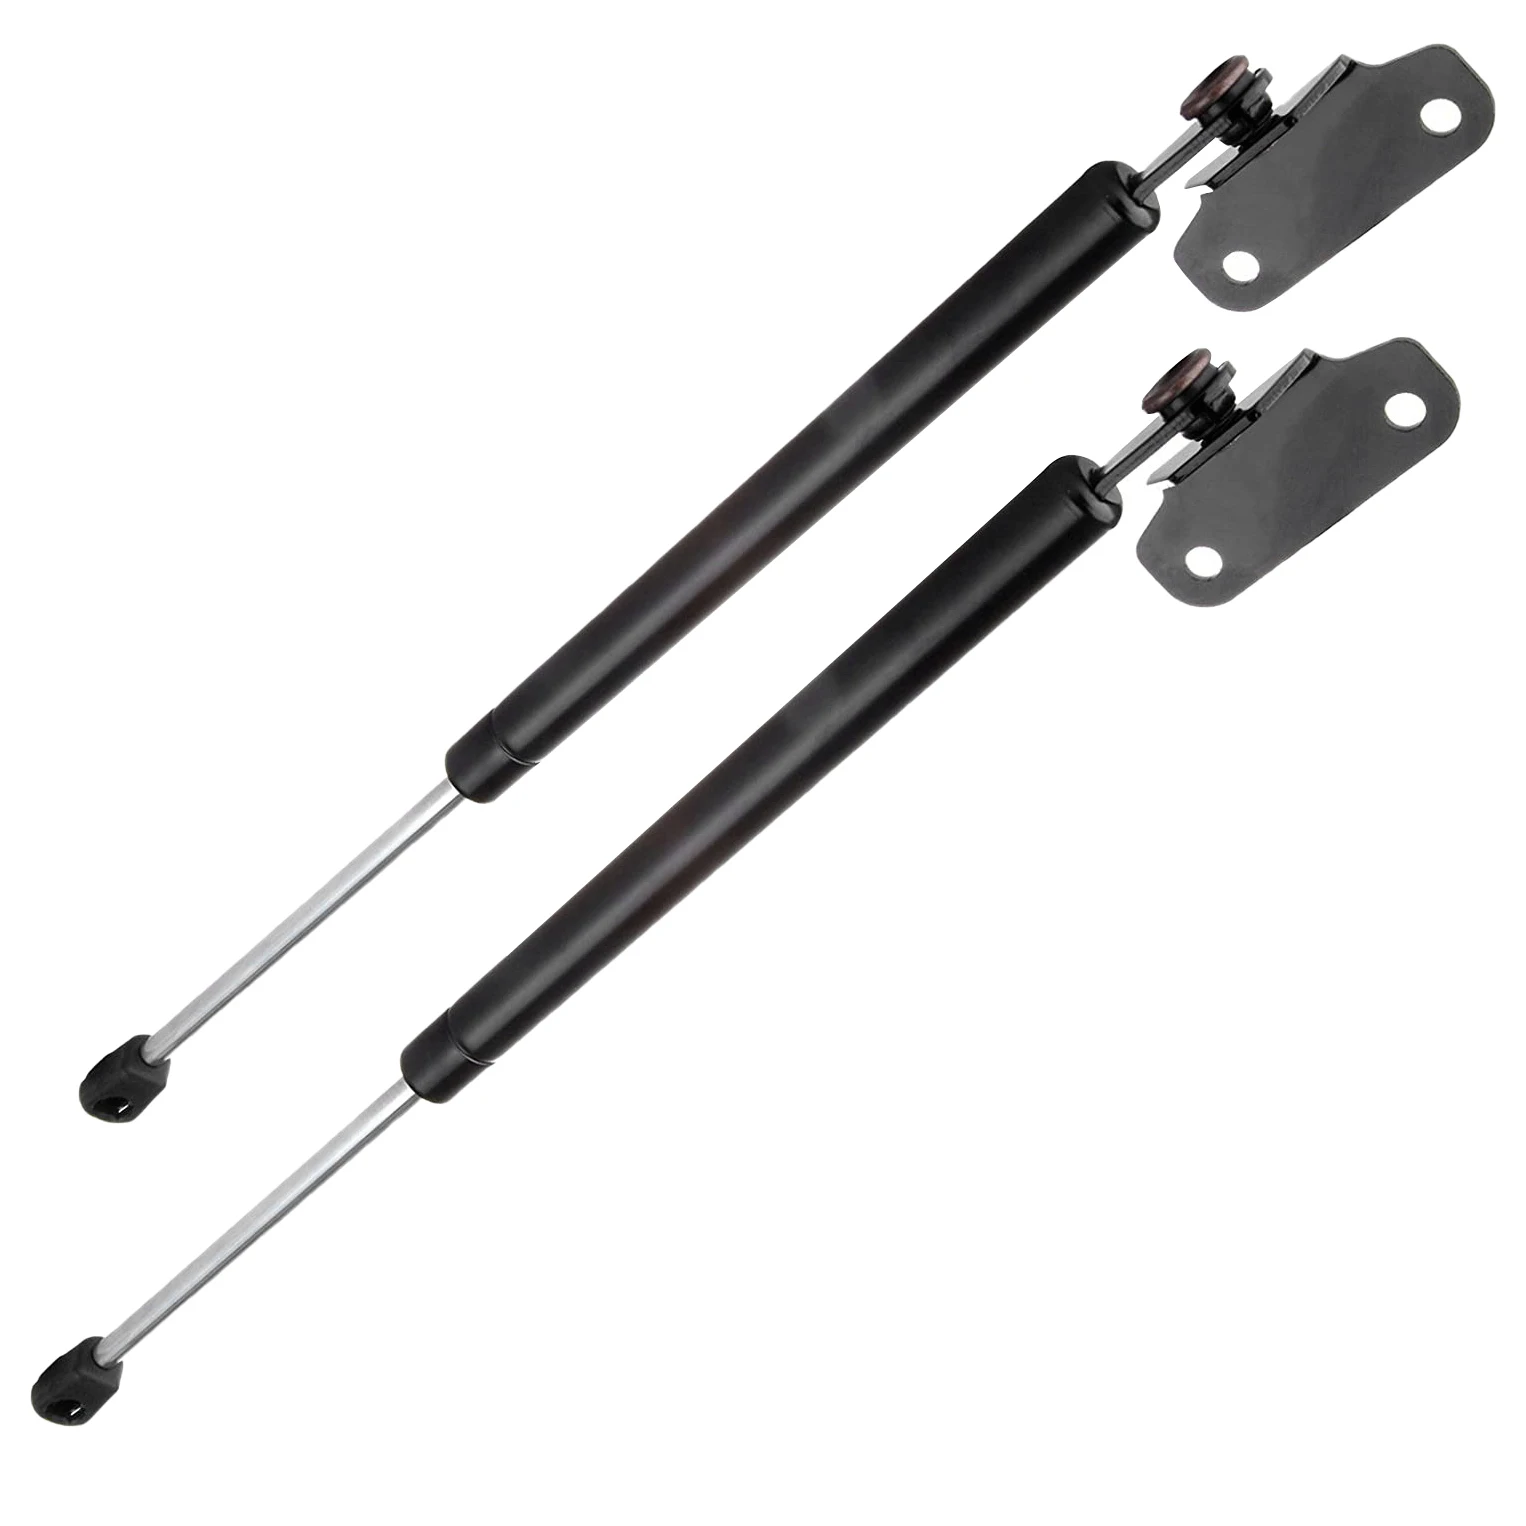 

for Honda Accord 2003-2007 PM2024 SG326013 Front Hood Lift Supports Gas Struts Shocks Springs